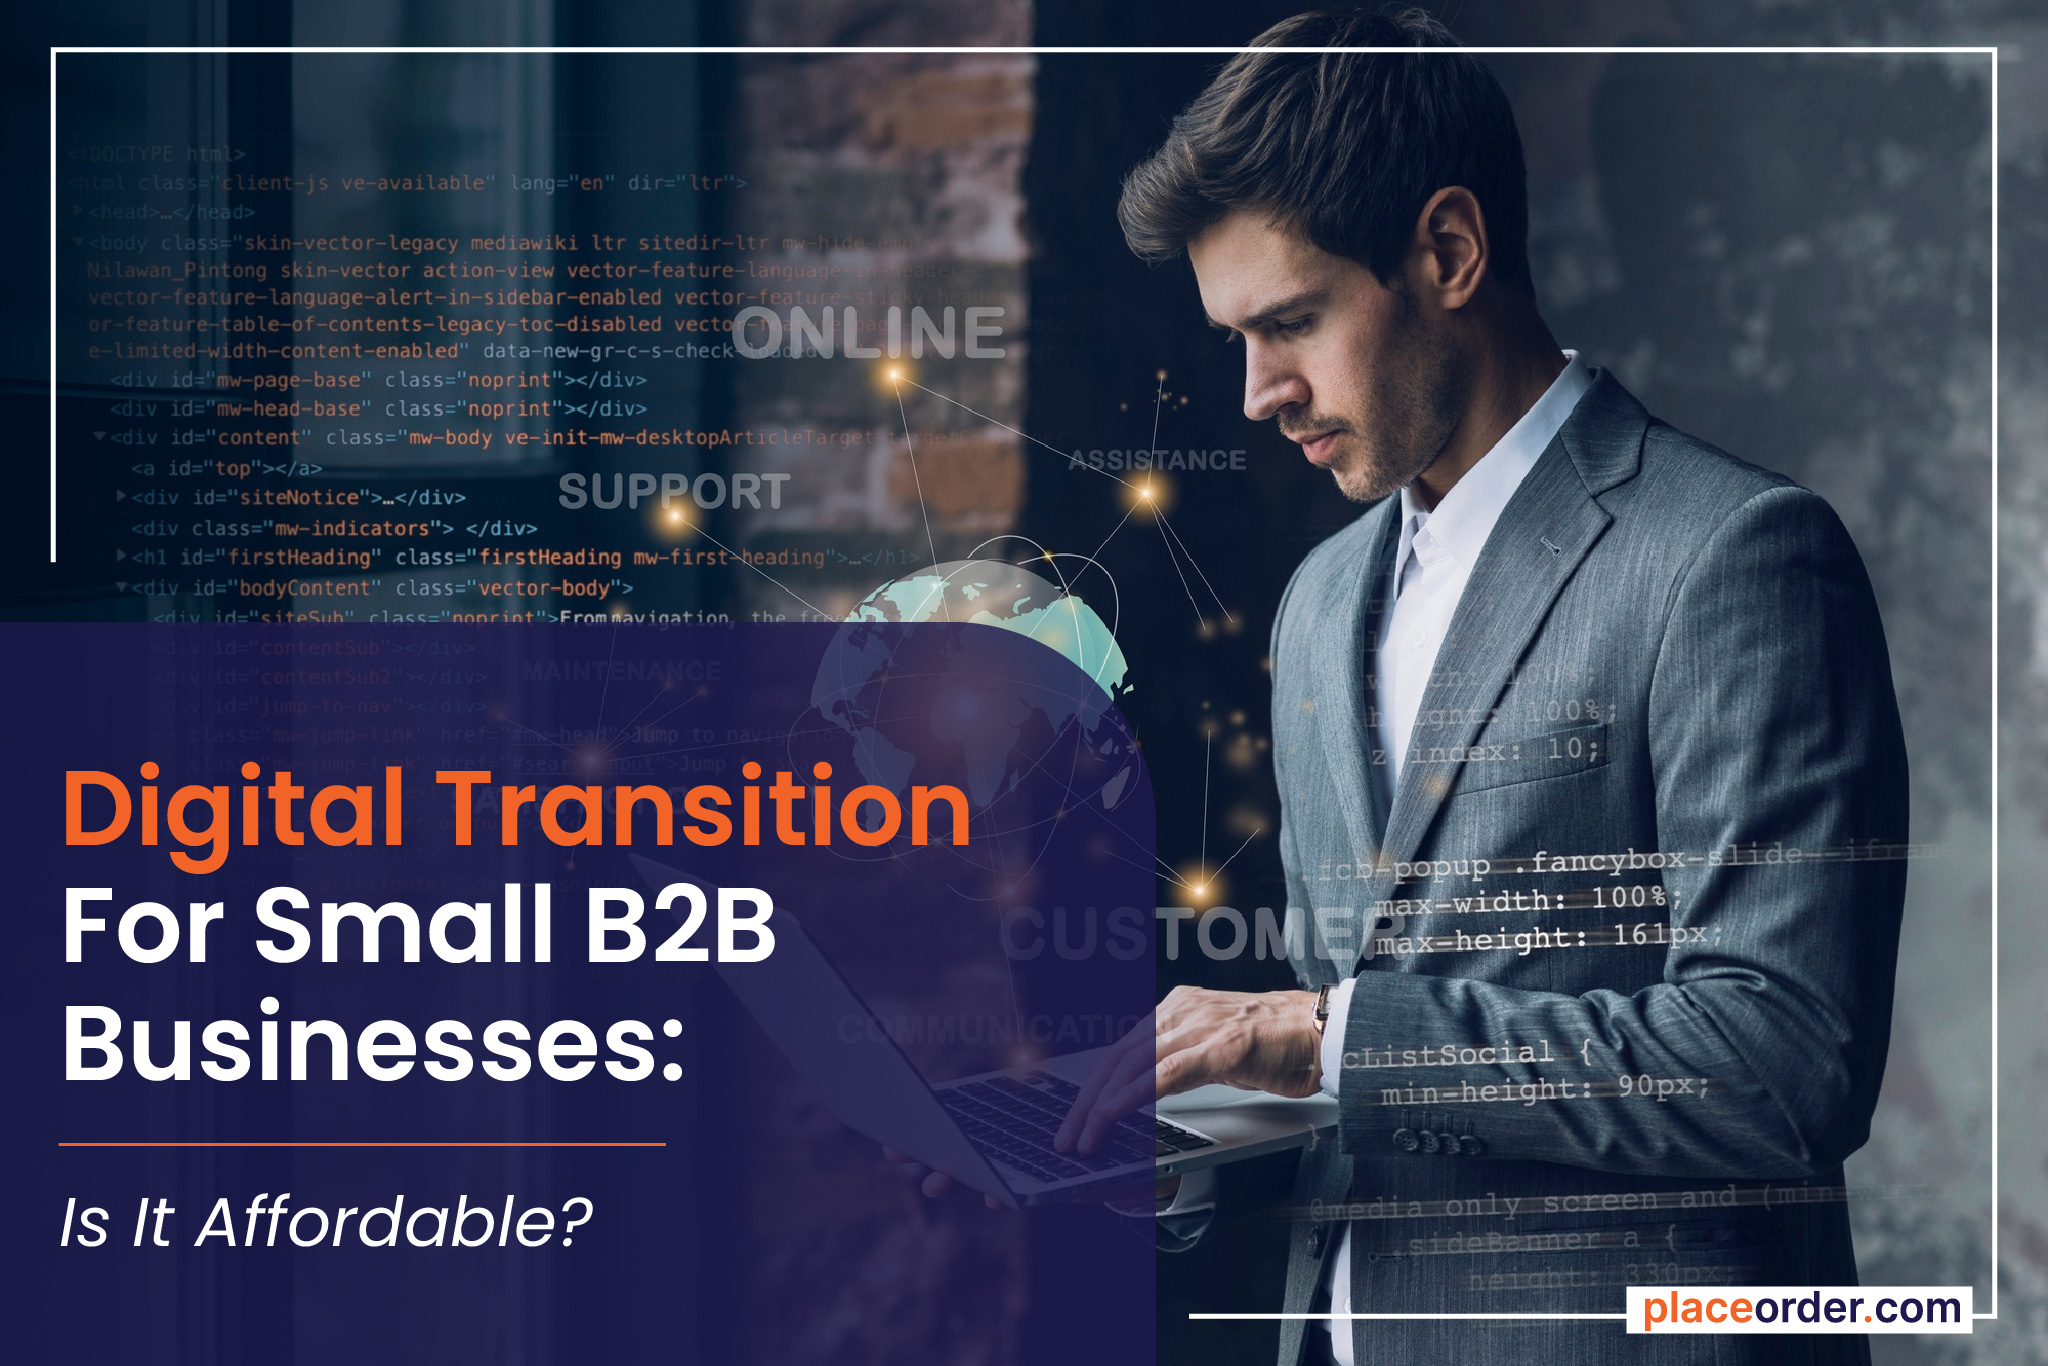 Digital Transition For Small B2B Businesses